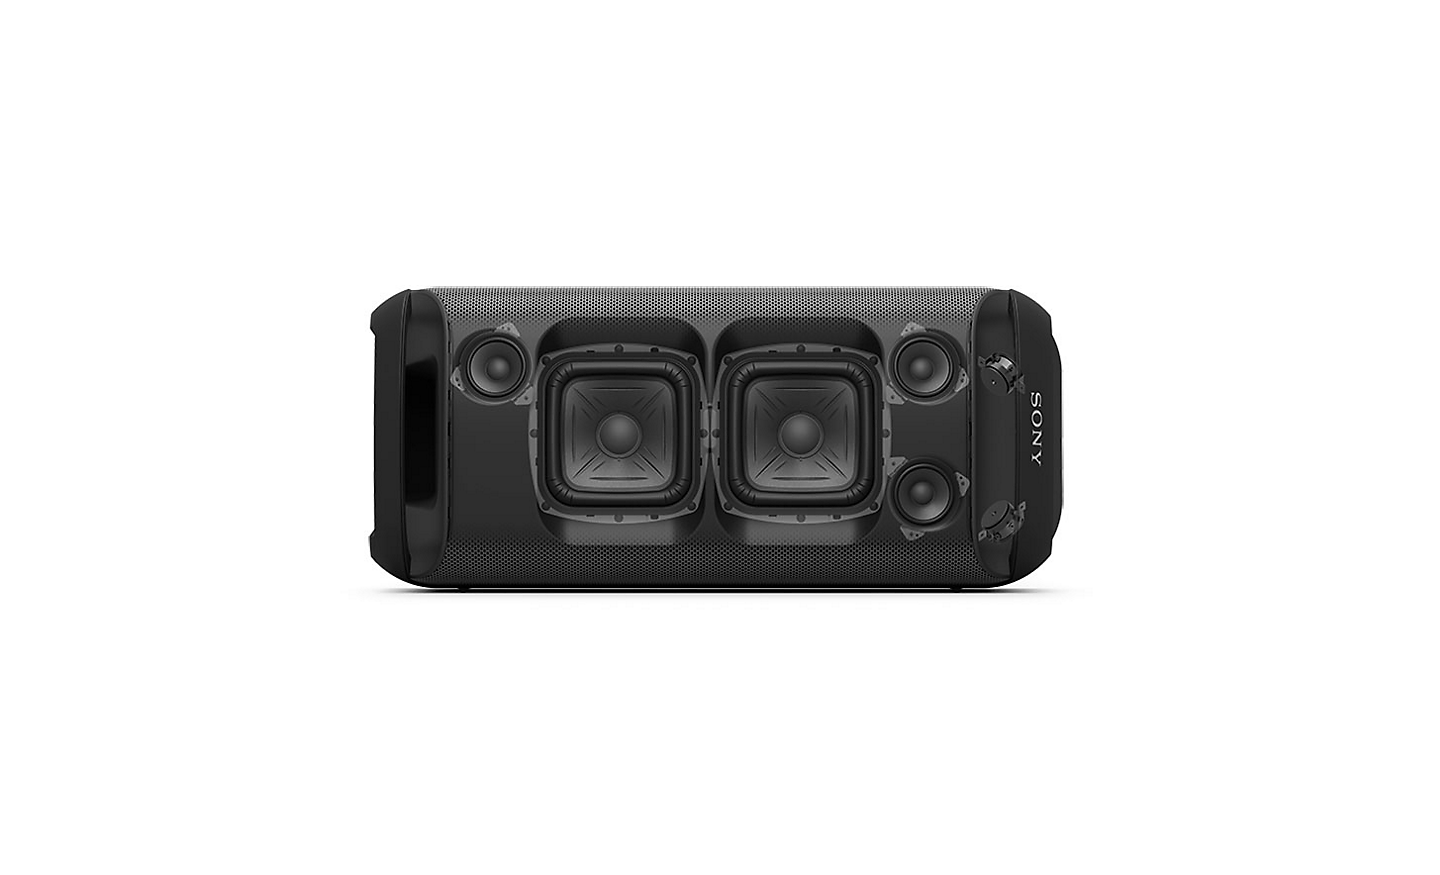 Image of the SRS-XV800 Wireless Party Speaker lying horizontally without grille, displaying the internal speaker configuration